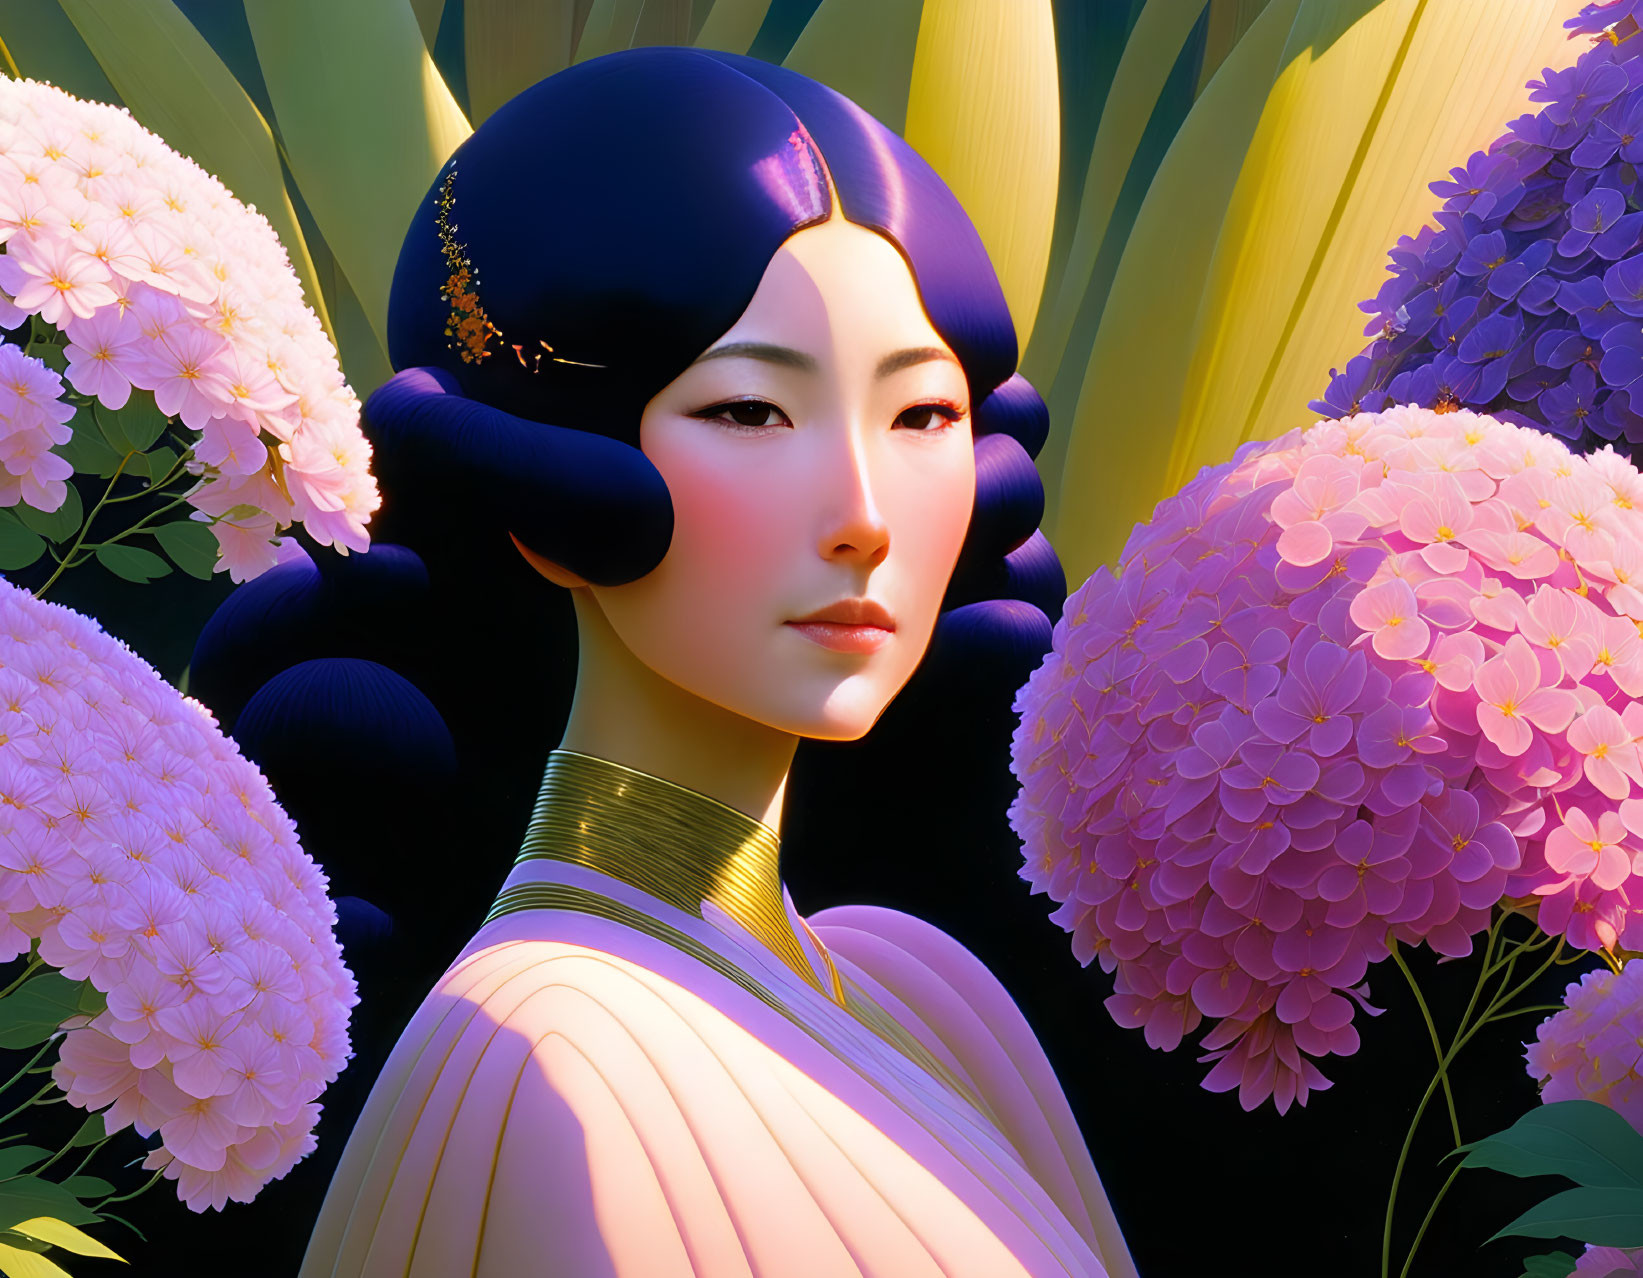 Stylized woman with blue hair in traditional attire among pink hydrangeas